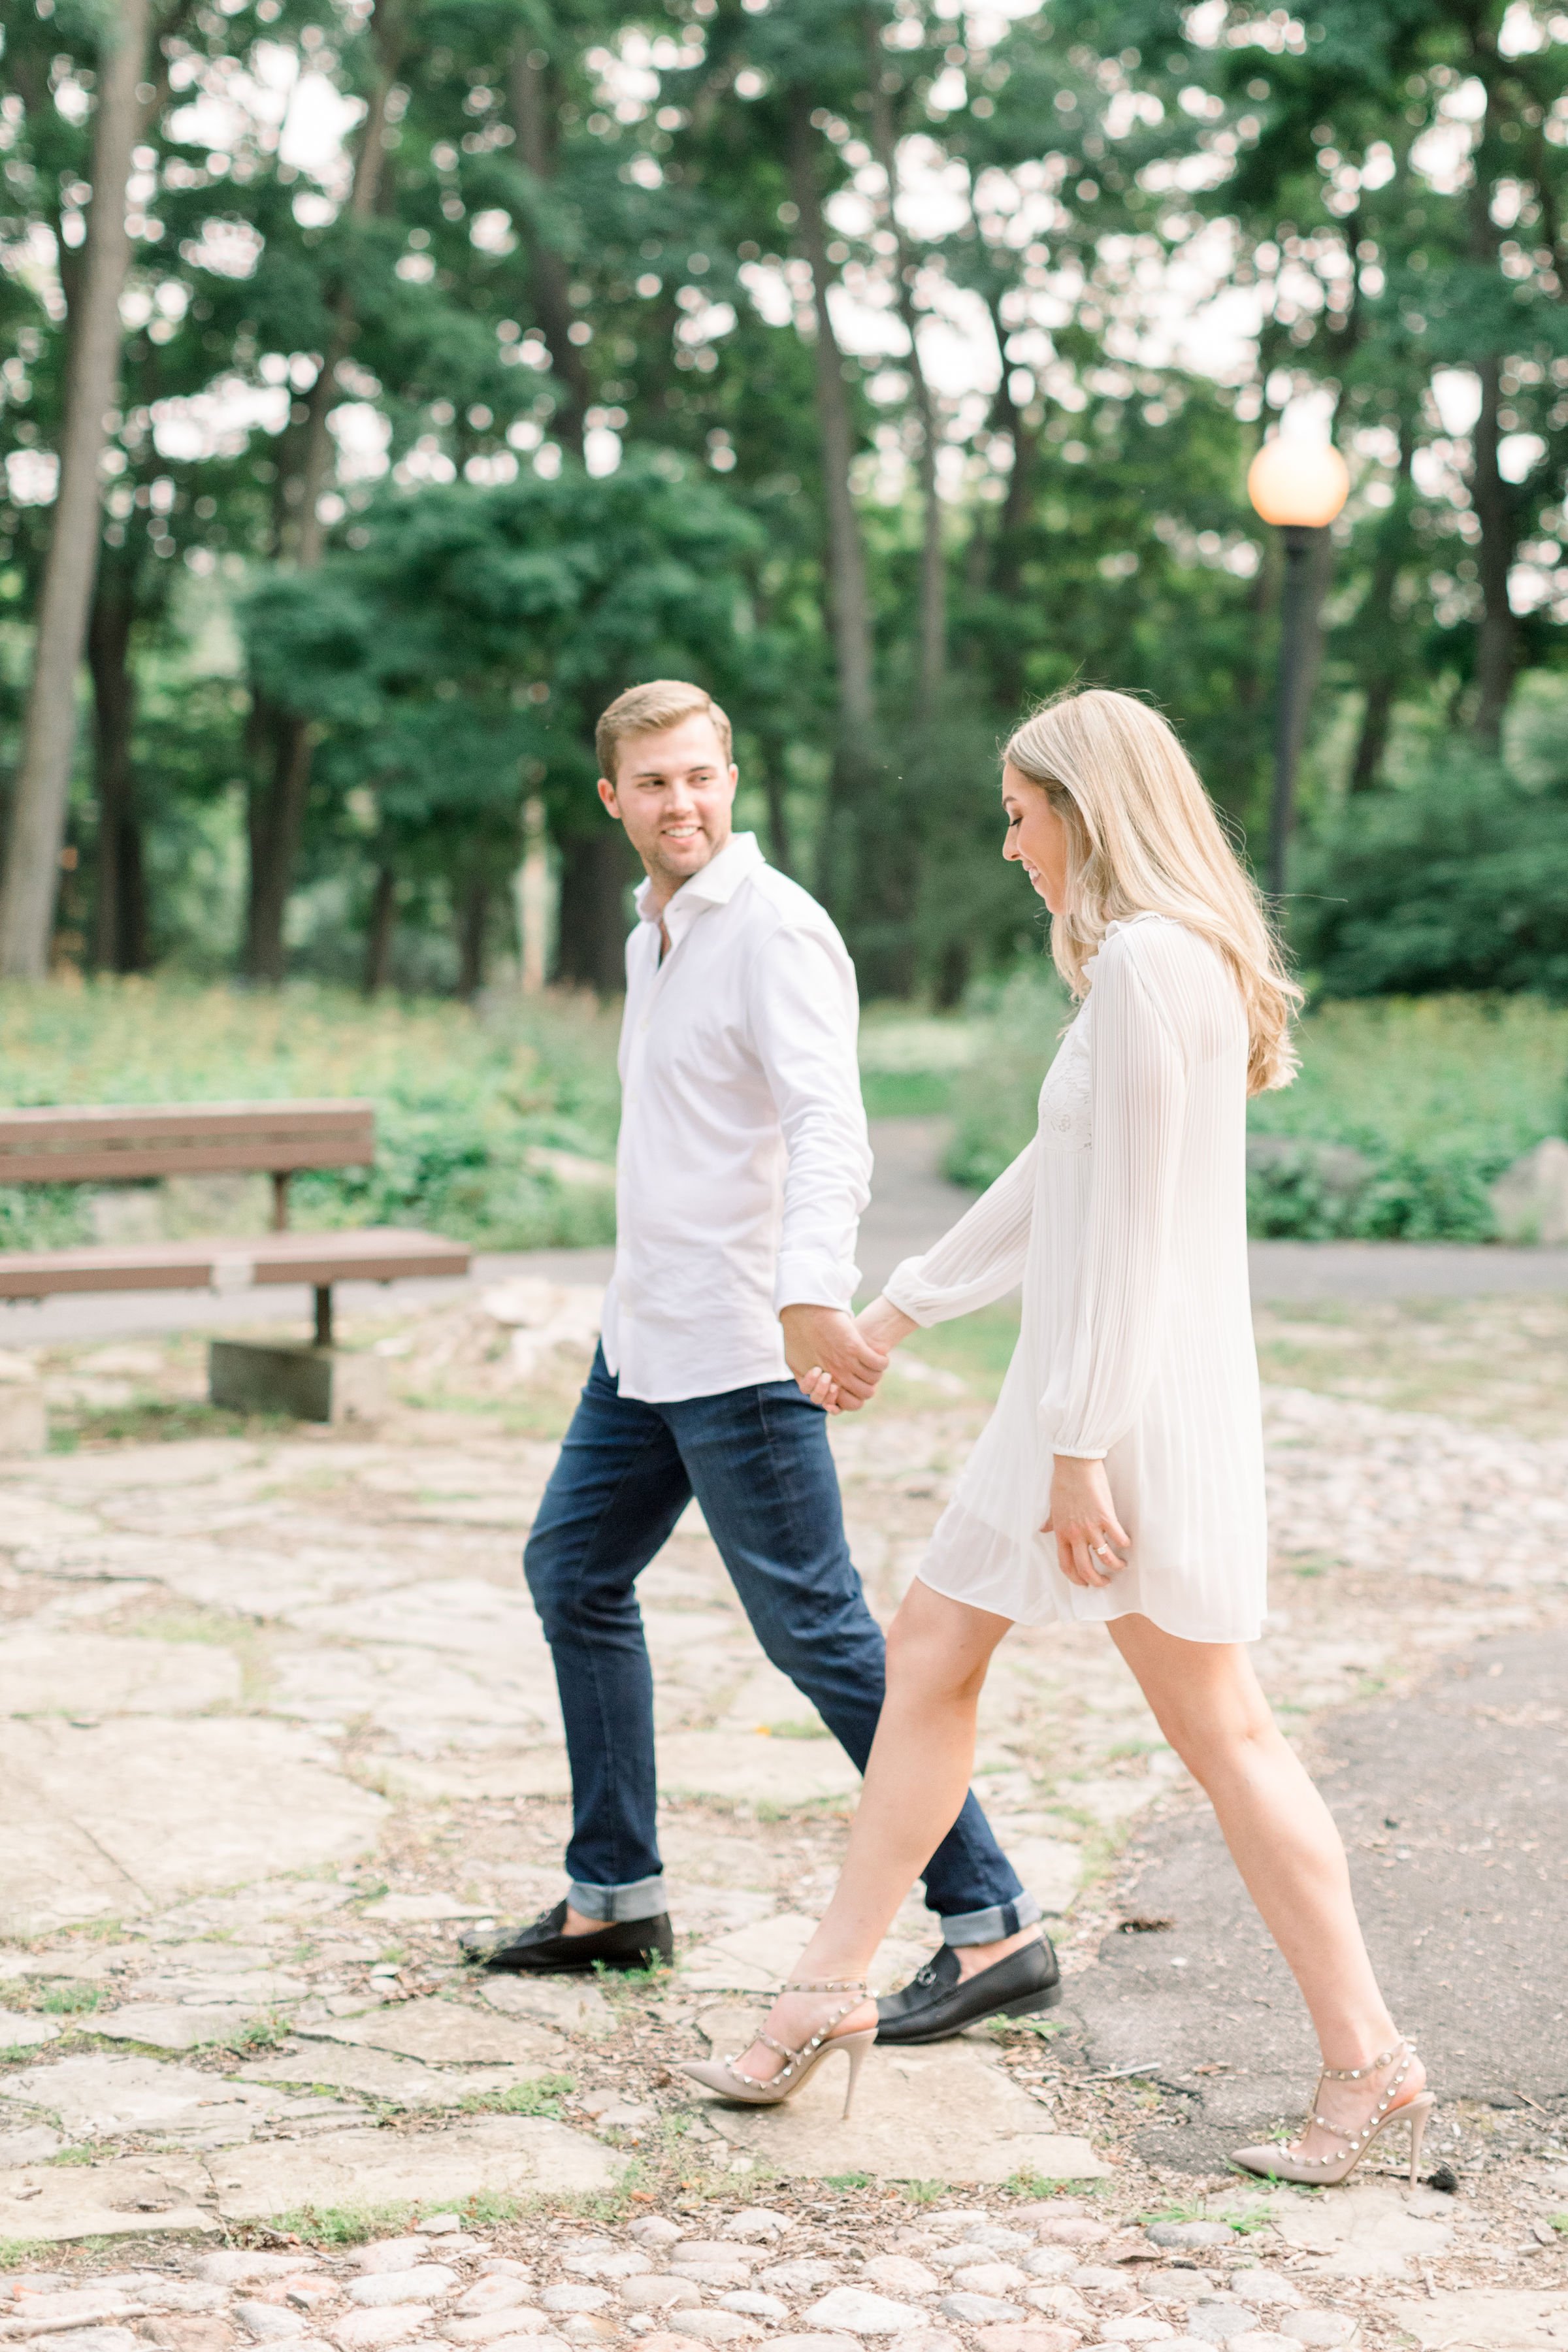  Walking hand in hand fiances smile at one another by Chelsea Mason Photography an engagement photographer. stone path white dress #Ottawaengagements #Ottawaweddingphotographers #engagementwithdogs #ChelseaMasonPhotography #ChelseaMasonEngagements  